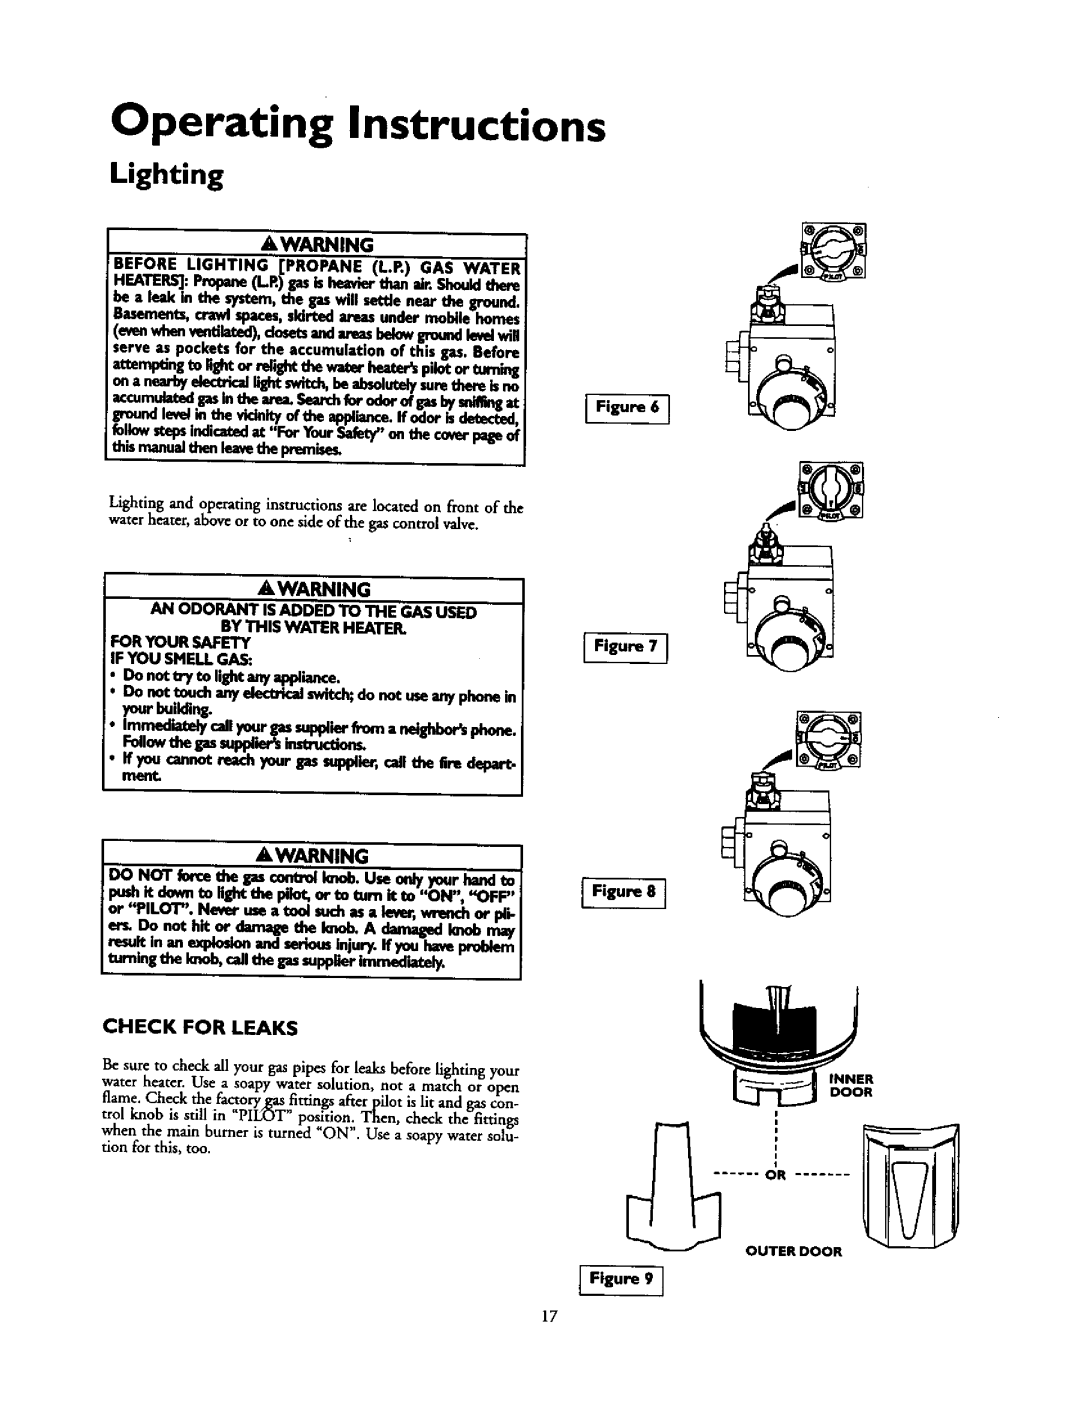 Kenmore 153.336951 Operating Instructions, Lighting, Oonottry to liShtanyap nce, Awarning, Check For Leaks, r =uit in an 